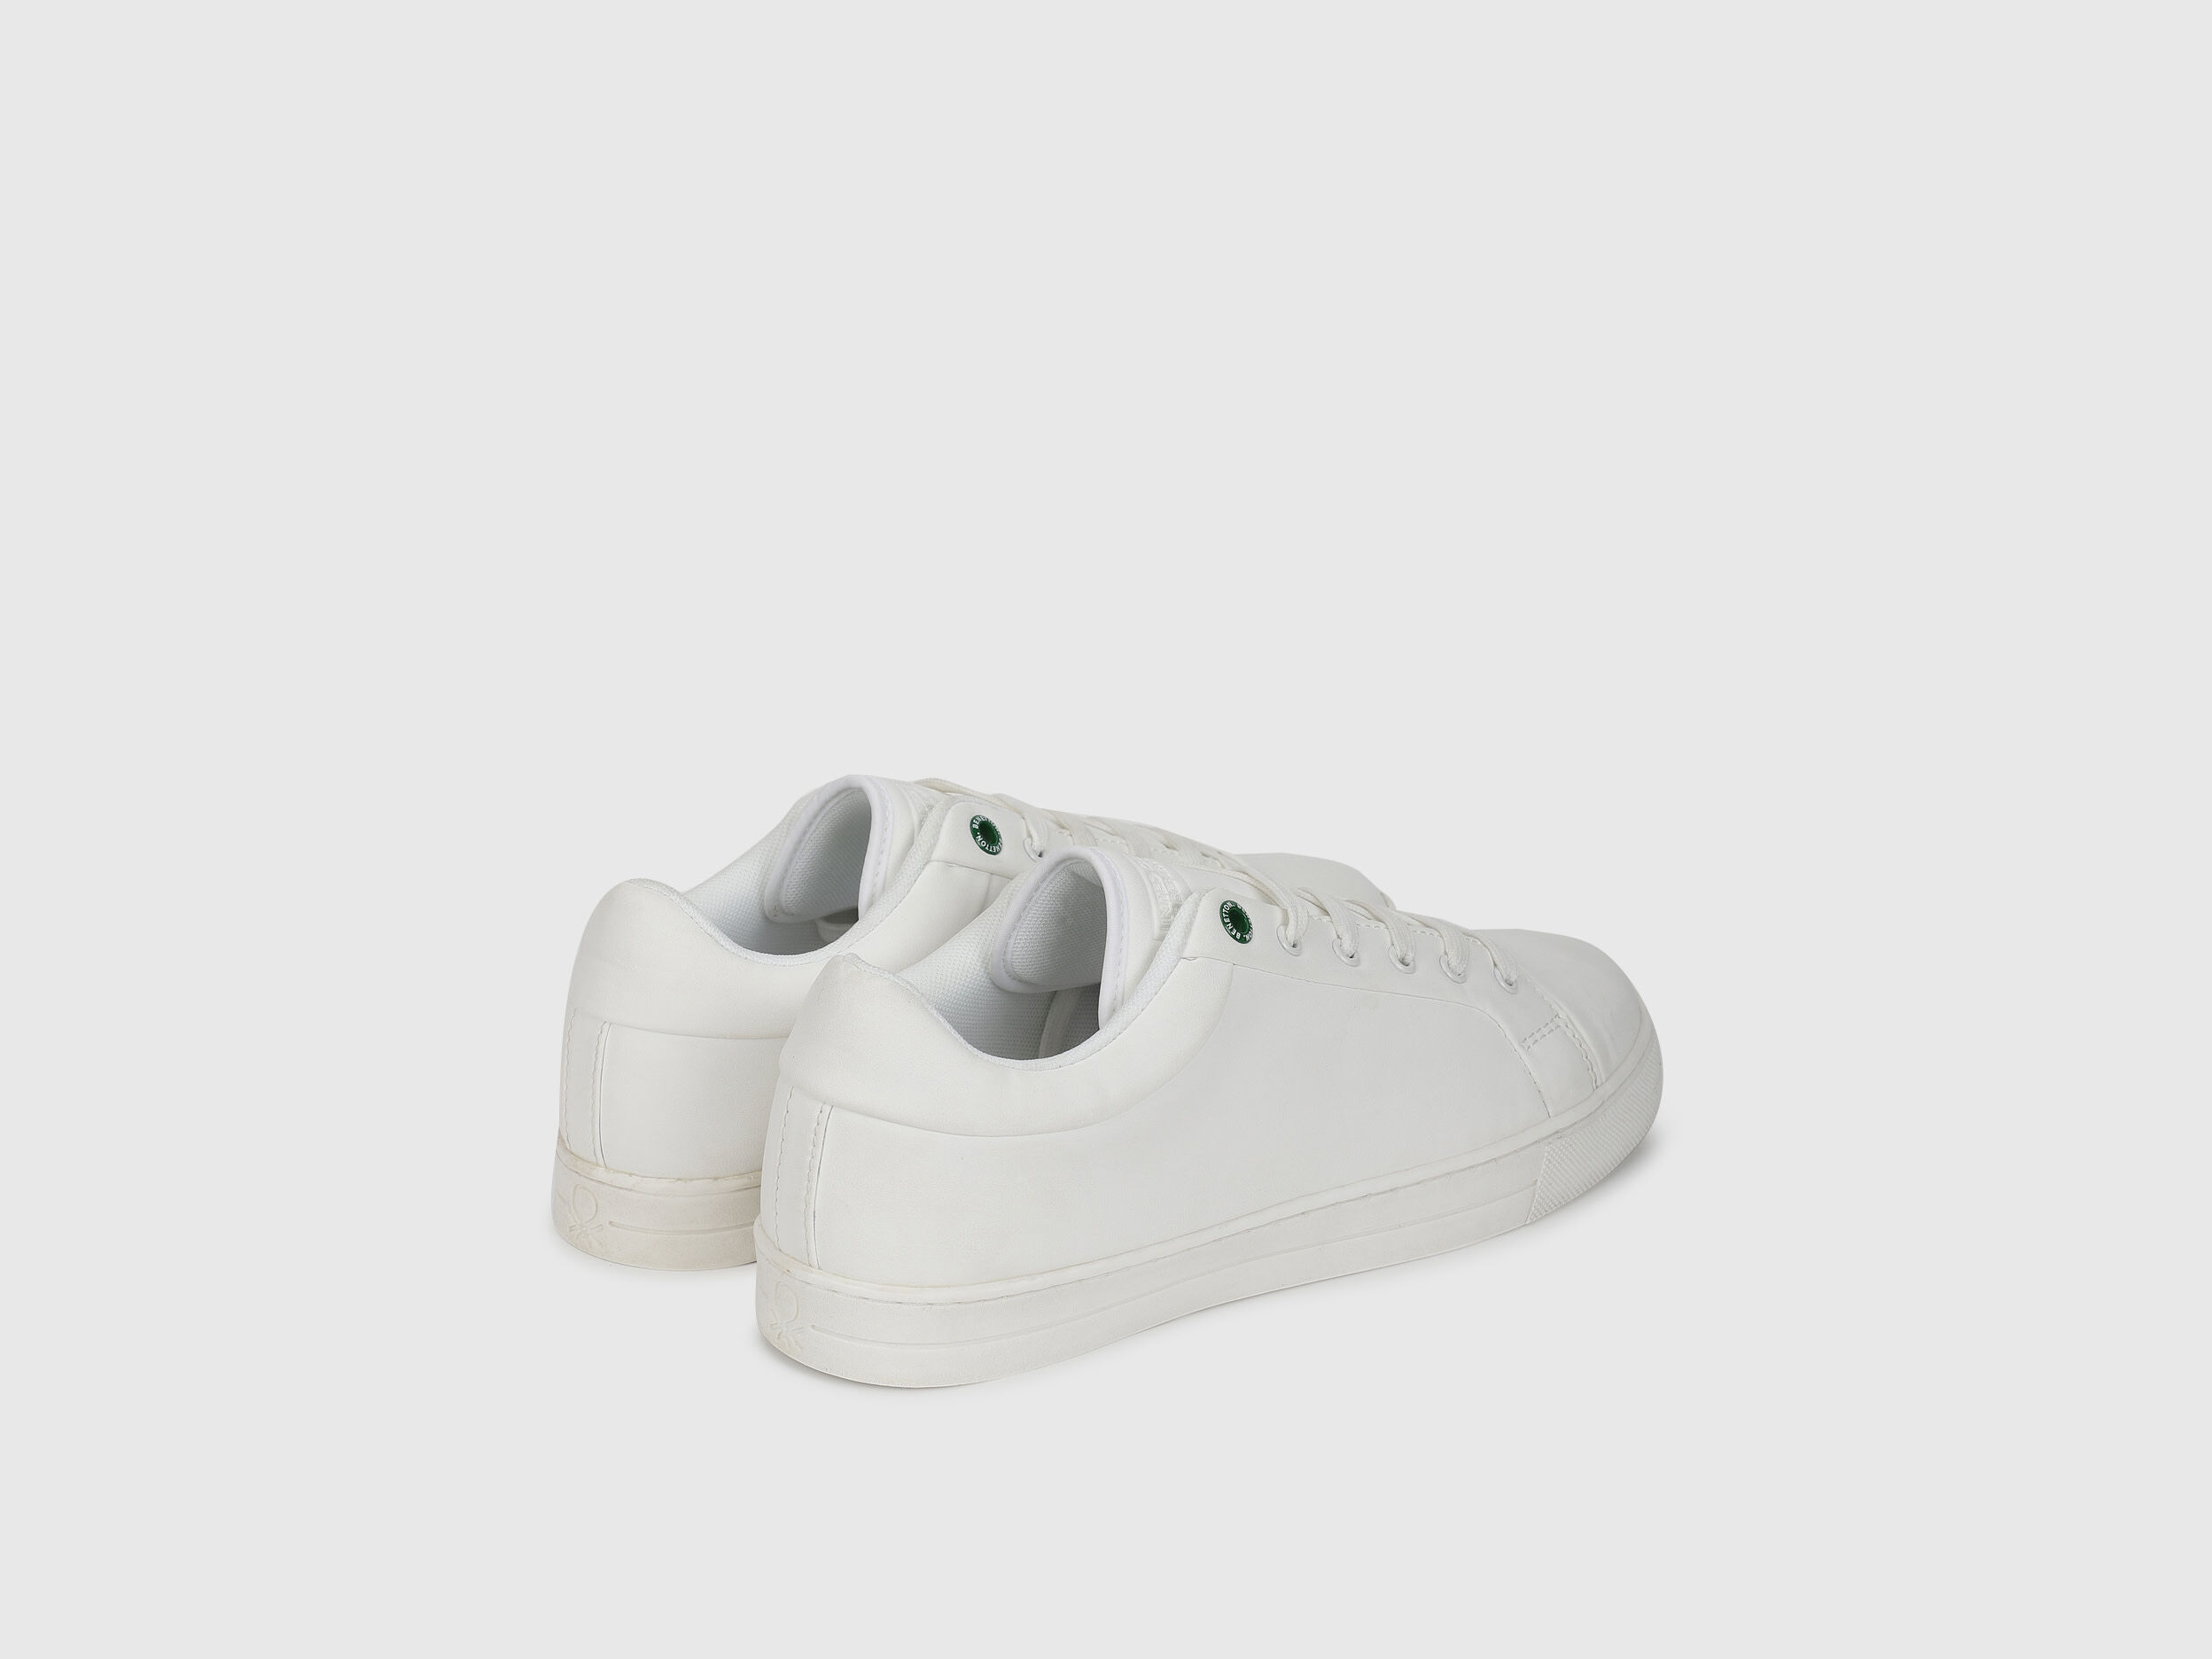 United Colors of Benetton Shoes - Low top sneakers - Boozt.com